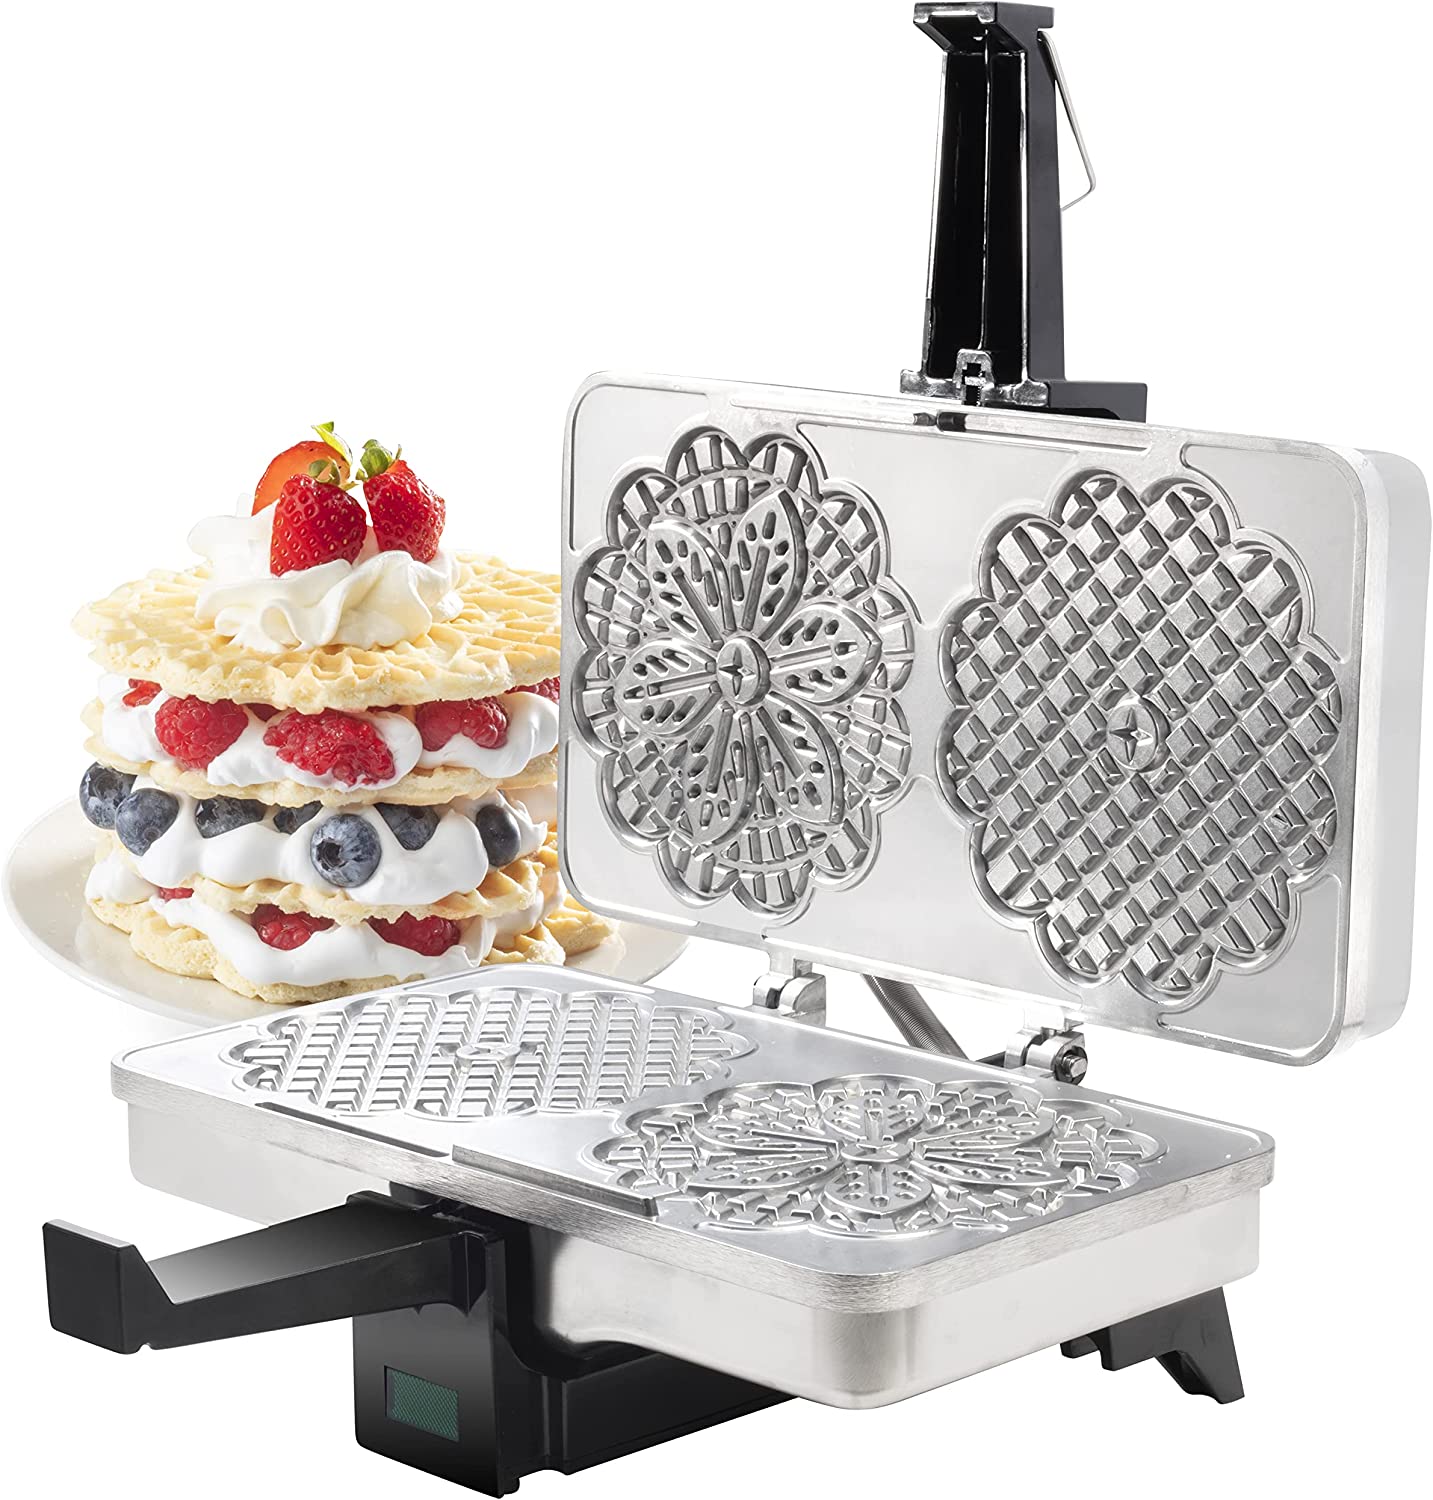 Pizzelle Maker - Polished Electric Baker Press Makes Two 5-Inch Cookies at Once - Recipes Included - image 3 of 5